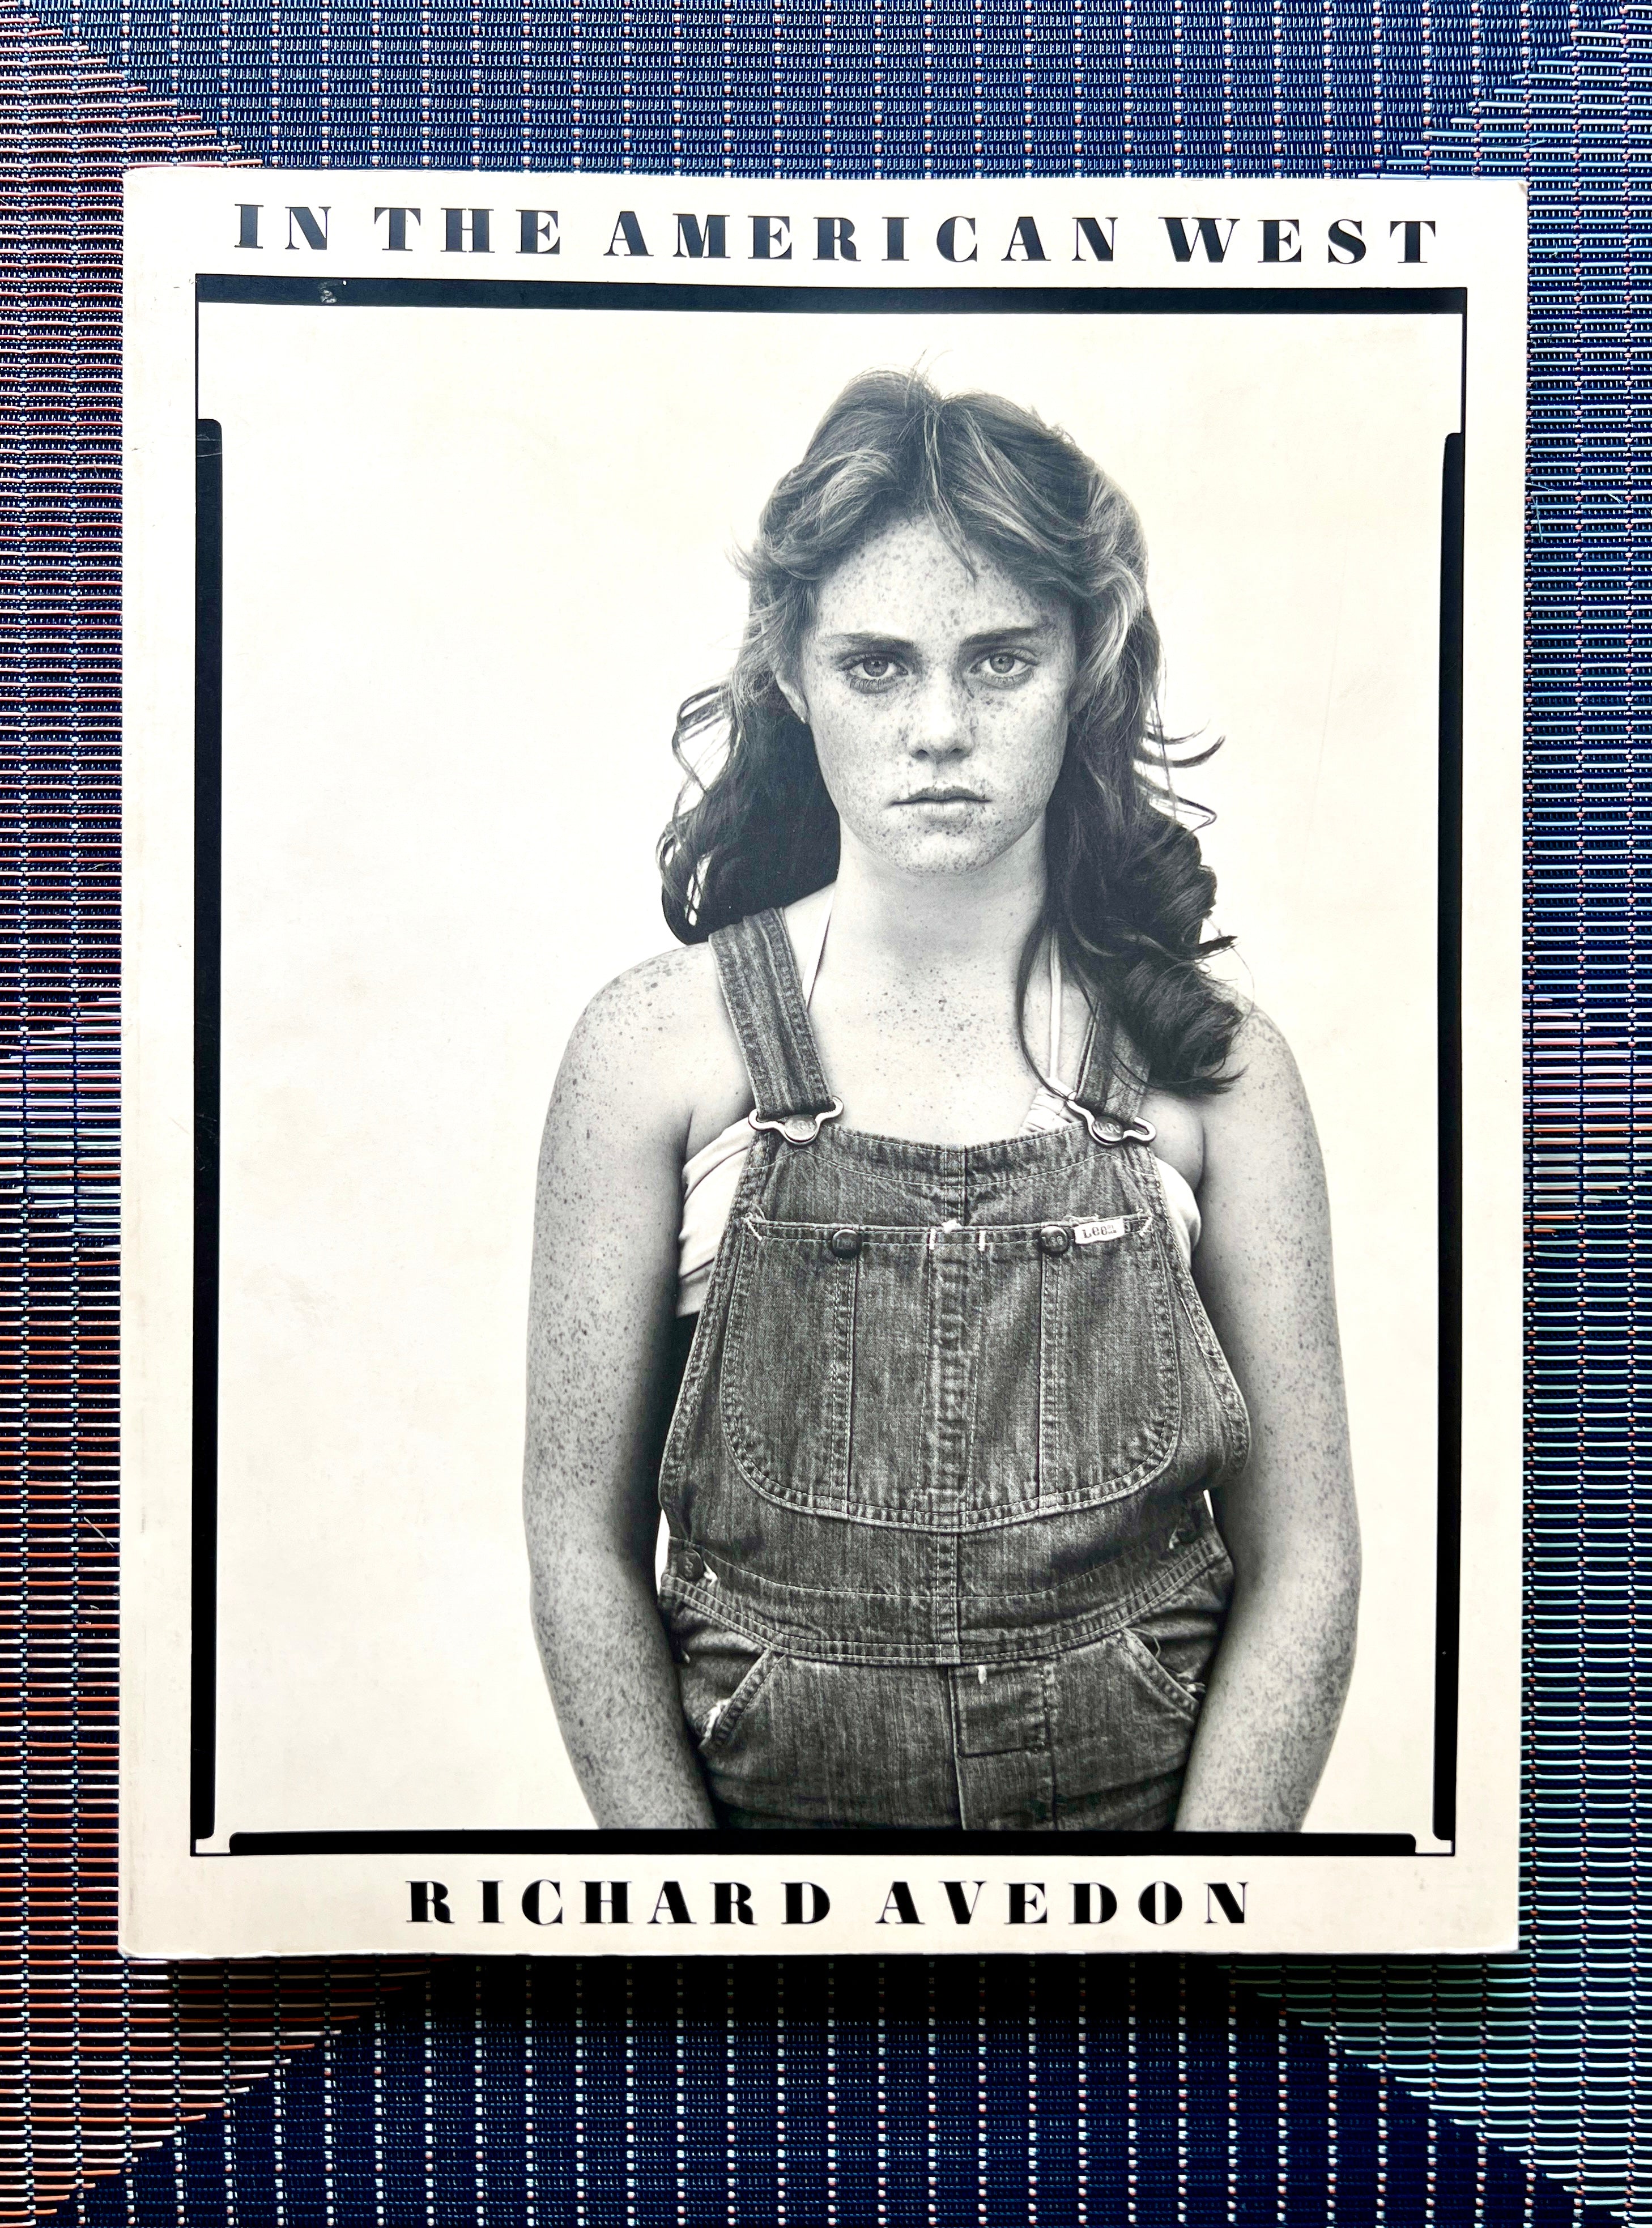 Signed Copy; "In the American West"; Richard Avedon Photography / Portraits 1979-1984